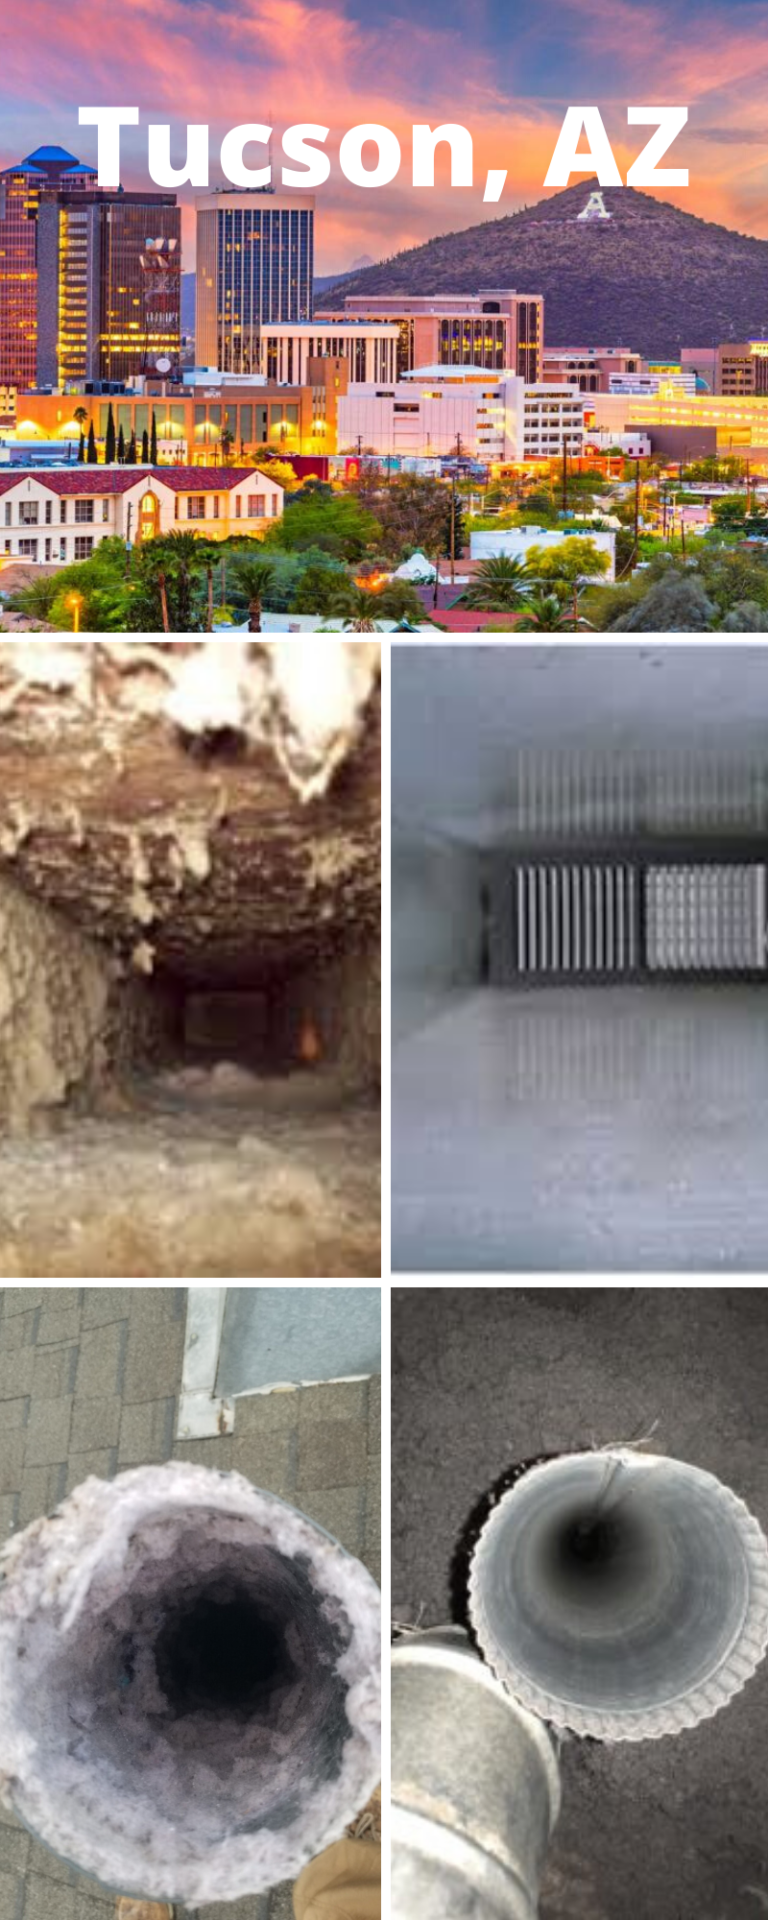 Air Duct & Dryer Vent Cleaning in Tucson, AZ Safe House Duct Cleaning in Phoenix AZ